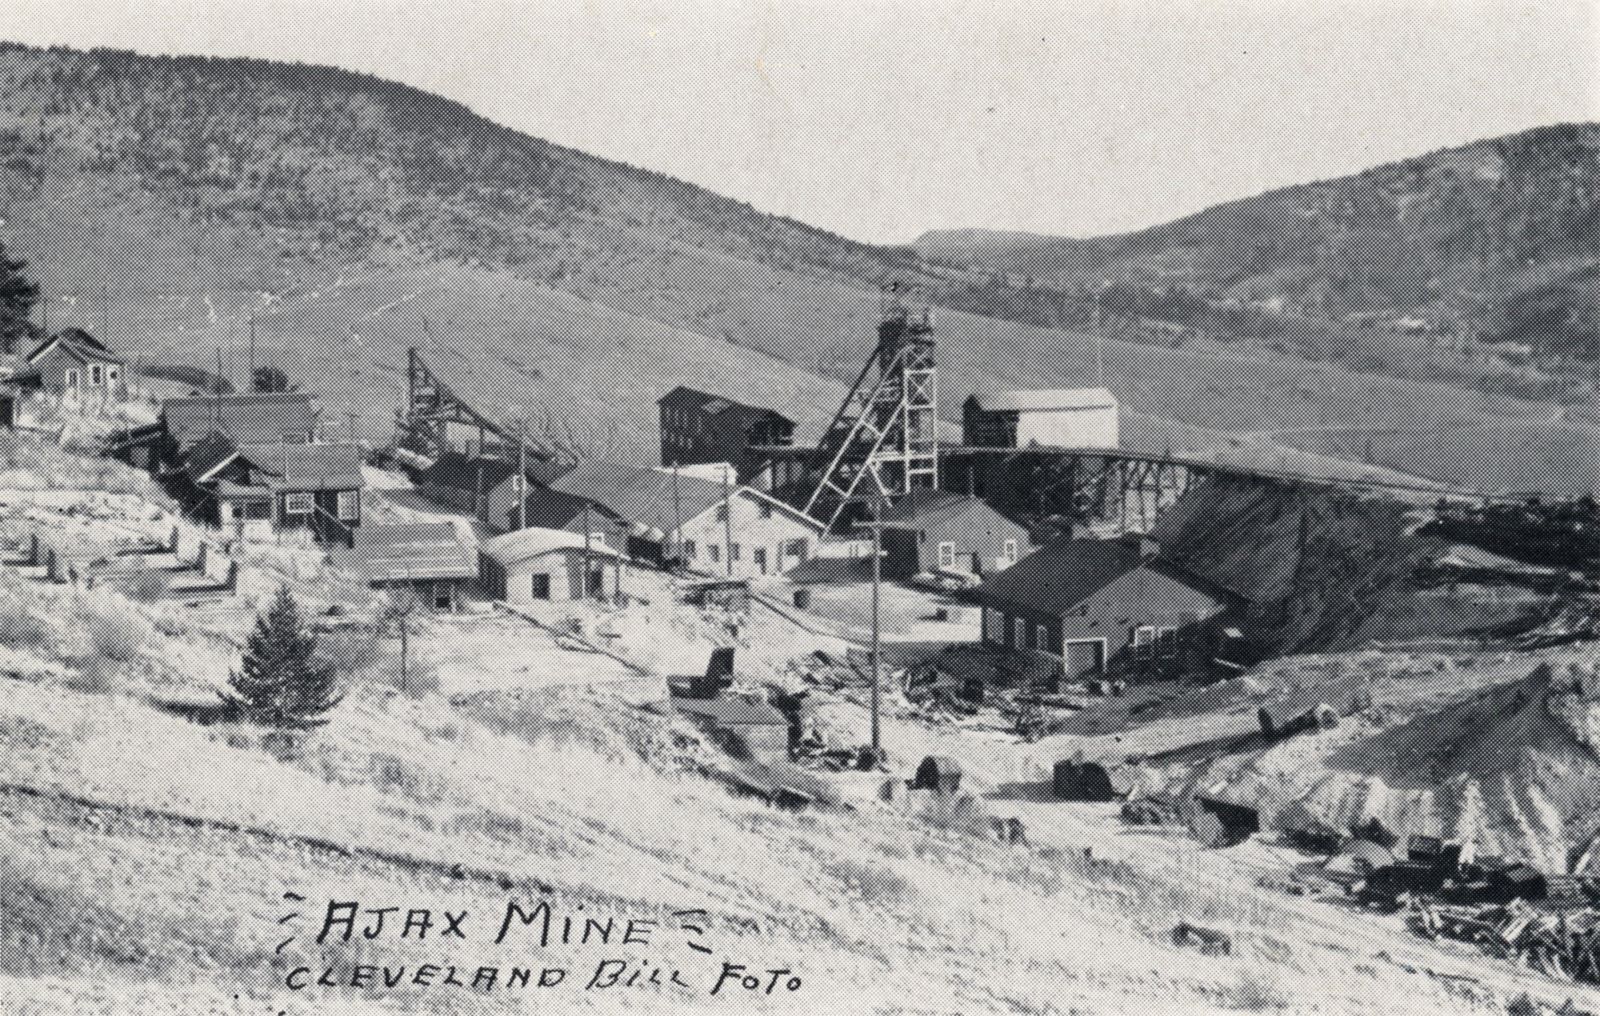 Actually, quite a nice view of the Ajax Mine area, I also have this an as photo from a Newspaper Archive, said to been photographed around January 1942. Not much to pick put in this view from the golden heydays when the massive mine structures dotted this area, and the railroads run in this area.
   I think about middle top/down on the left-hand side is the foundation for the Clancy/Ajax Mill, while the Ajax Headframe is easy enough to pick out just right of the center of the view.